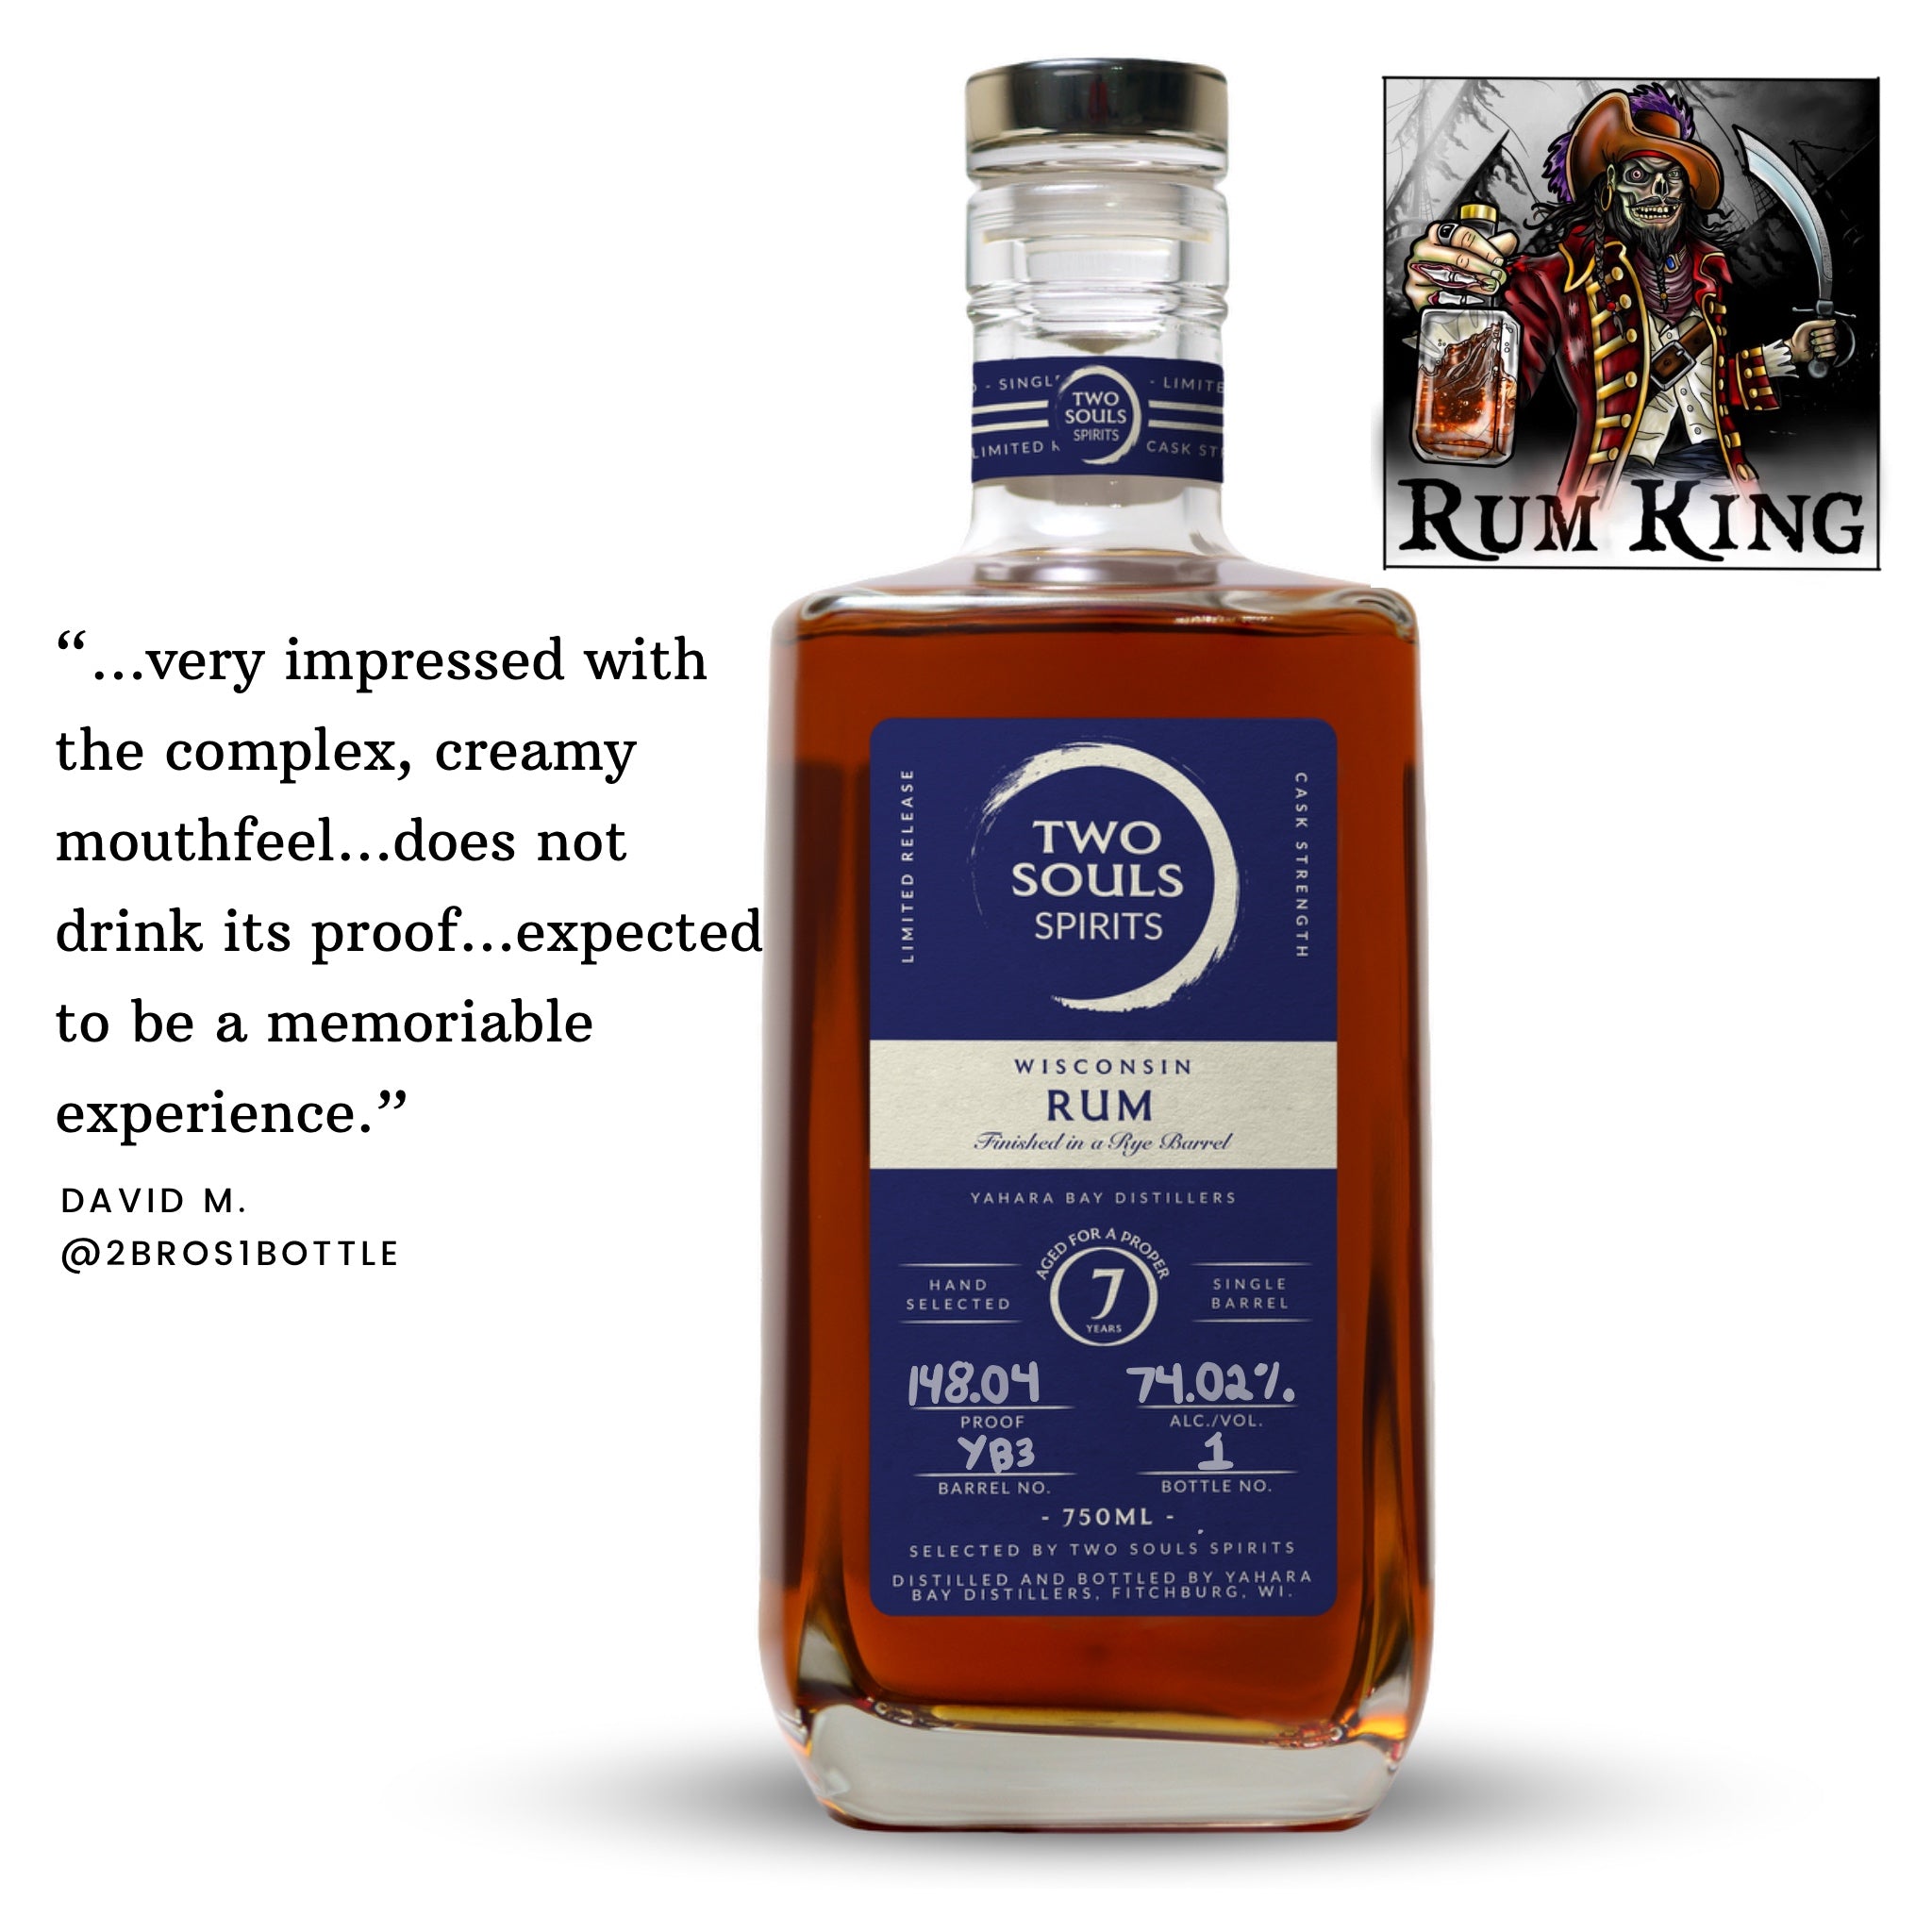 7-Year Wisconsin Rye Cask Finished Rum Featuring Yahara Bay Distillers